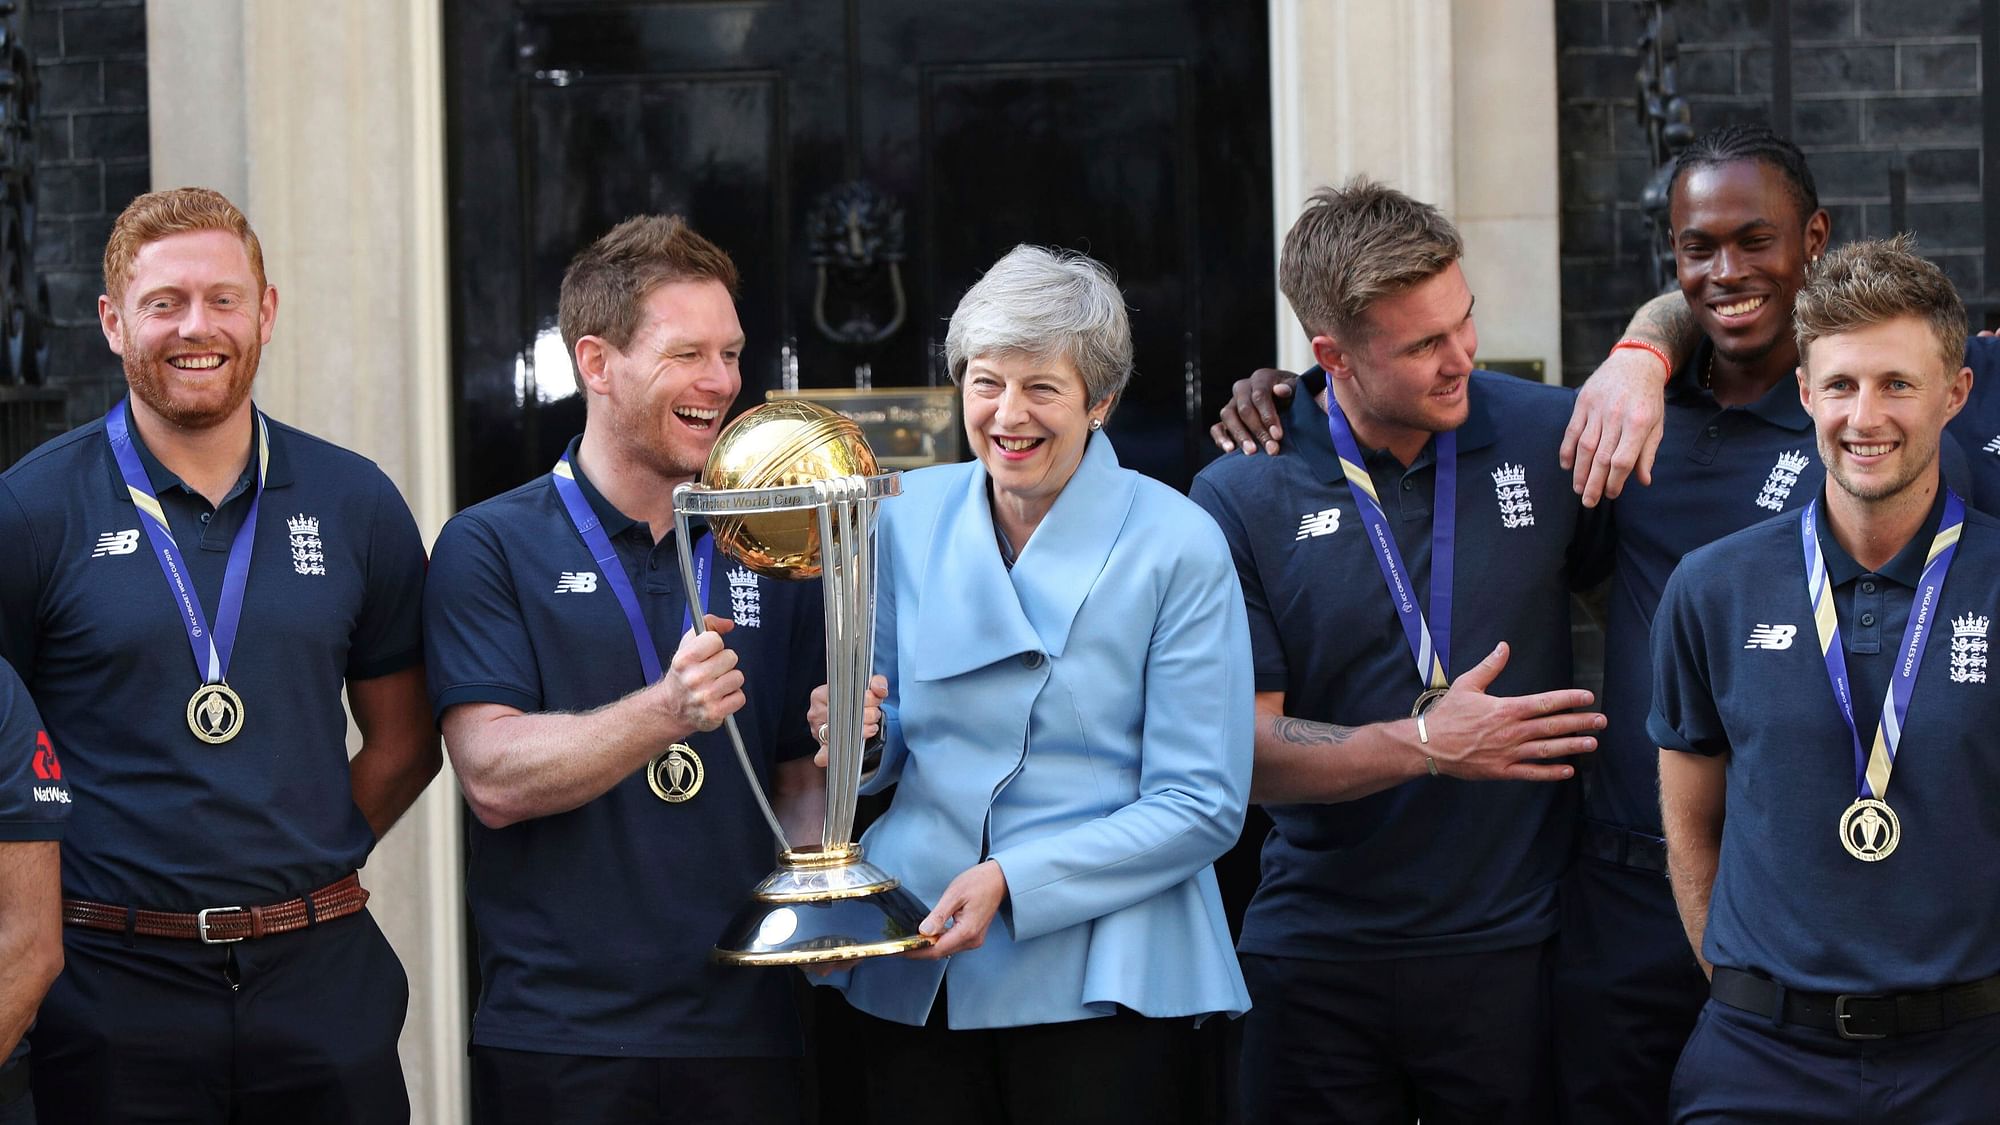 Britain’s Prime Minister Theresa May smiles as she stands with England cricket captain Eoin Morgan, members of the team and the trophy after England won the Cricket World Cup, outside Downing Street in London, Monday, July 15, 2019. (Yui Mok/PA via AP)